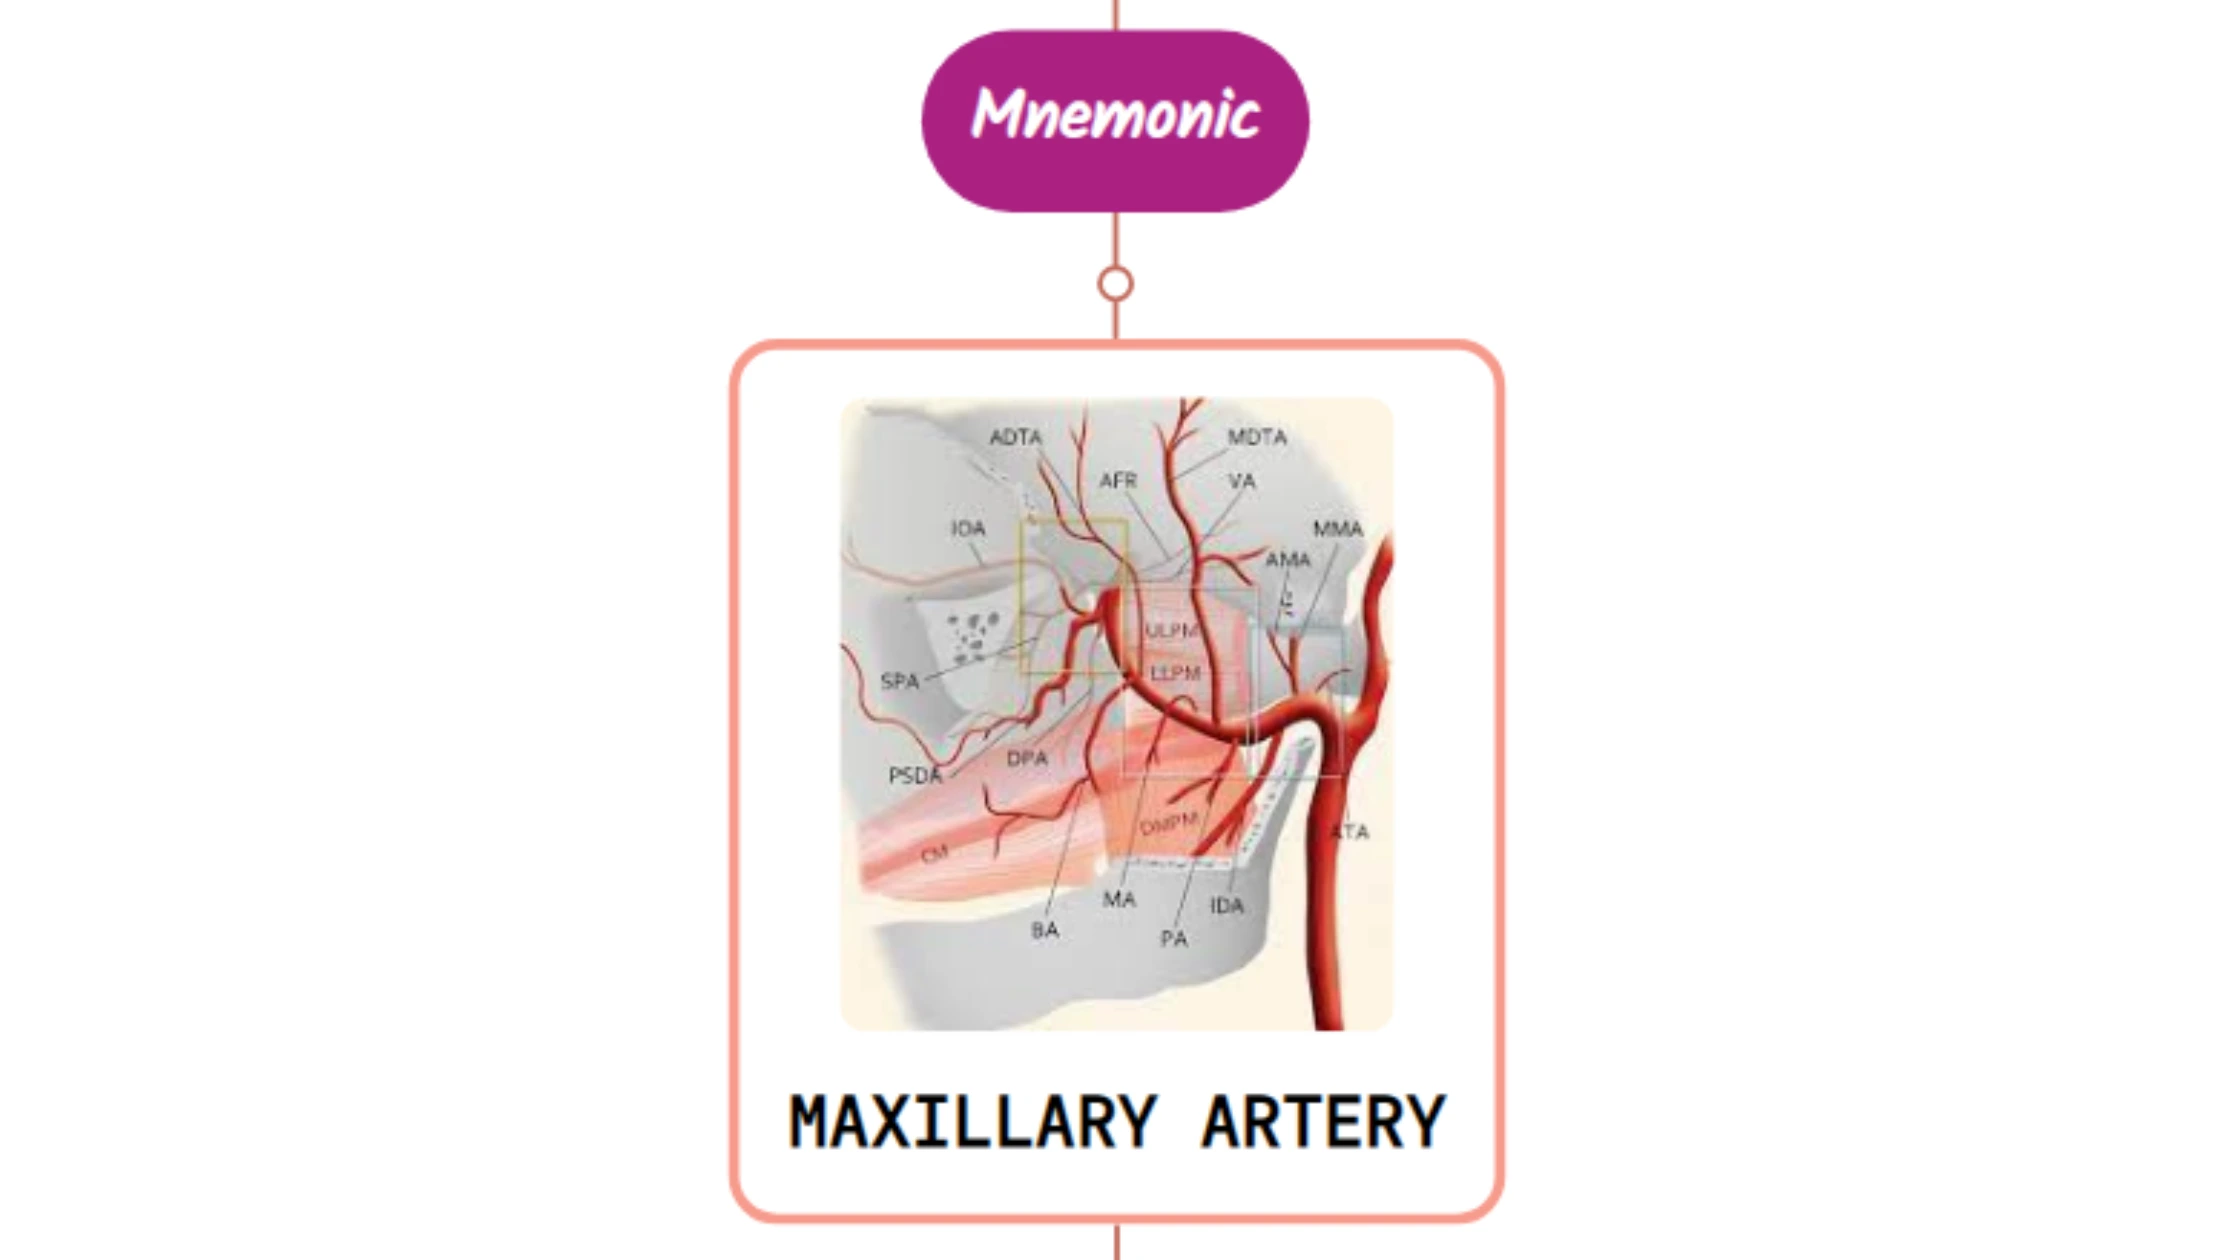 You are currently viewing Maxillary Artery – Mnemonic